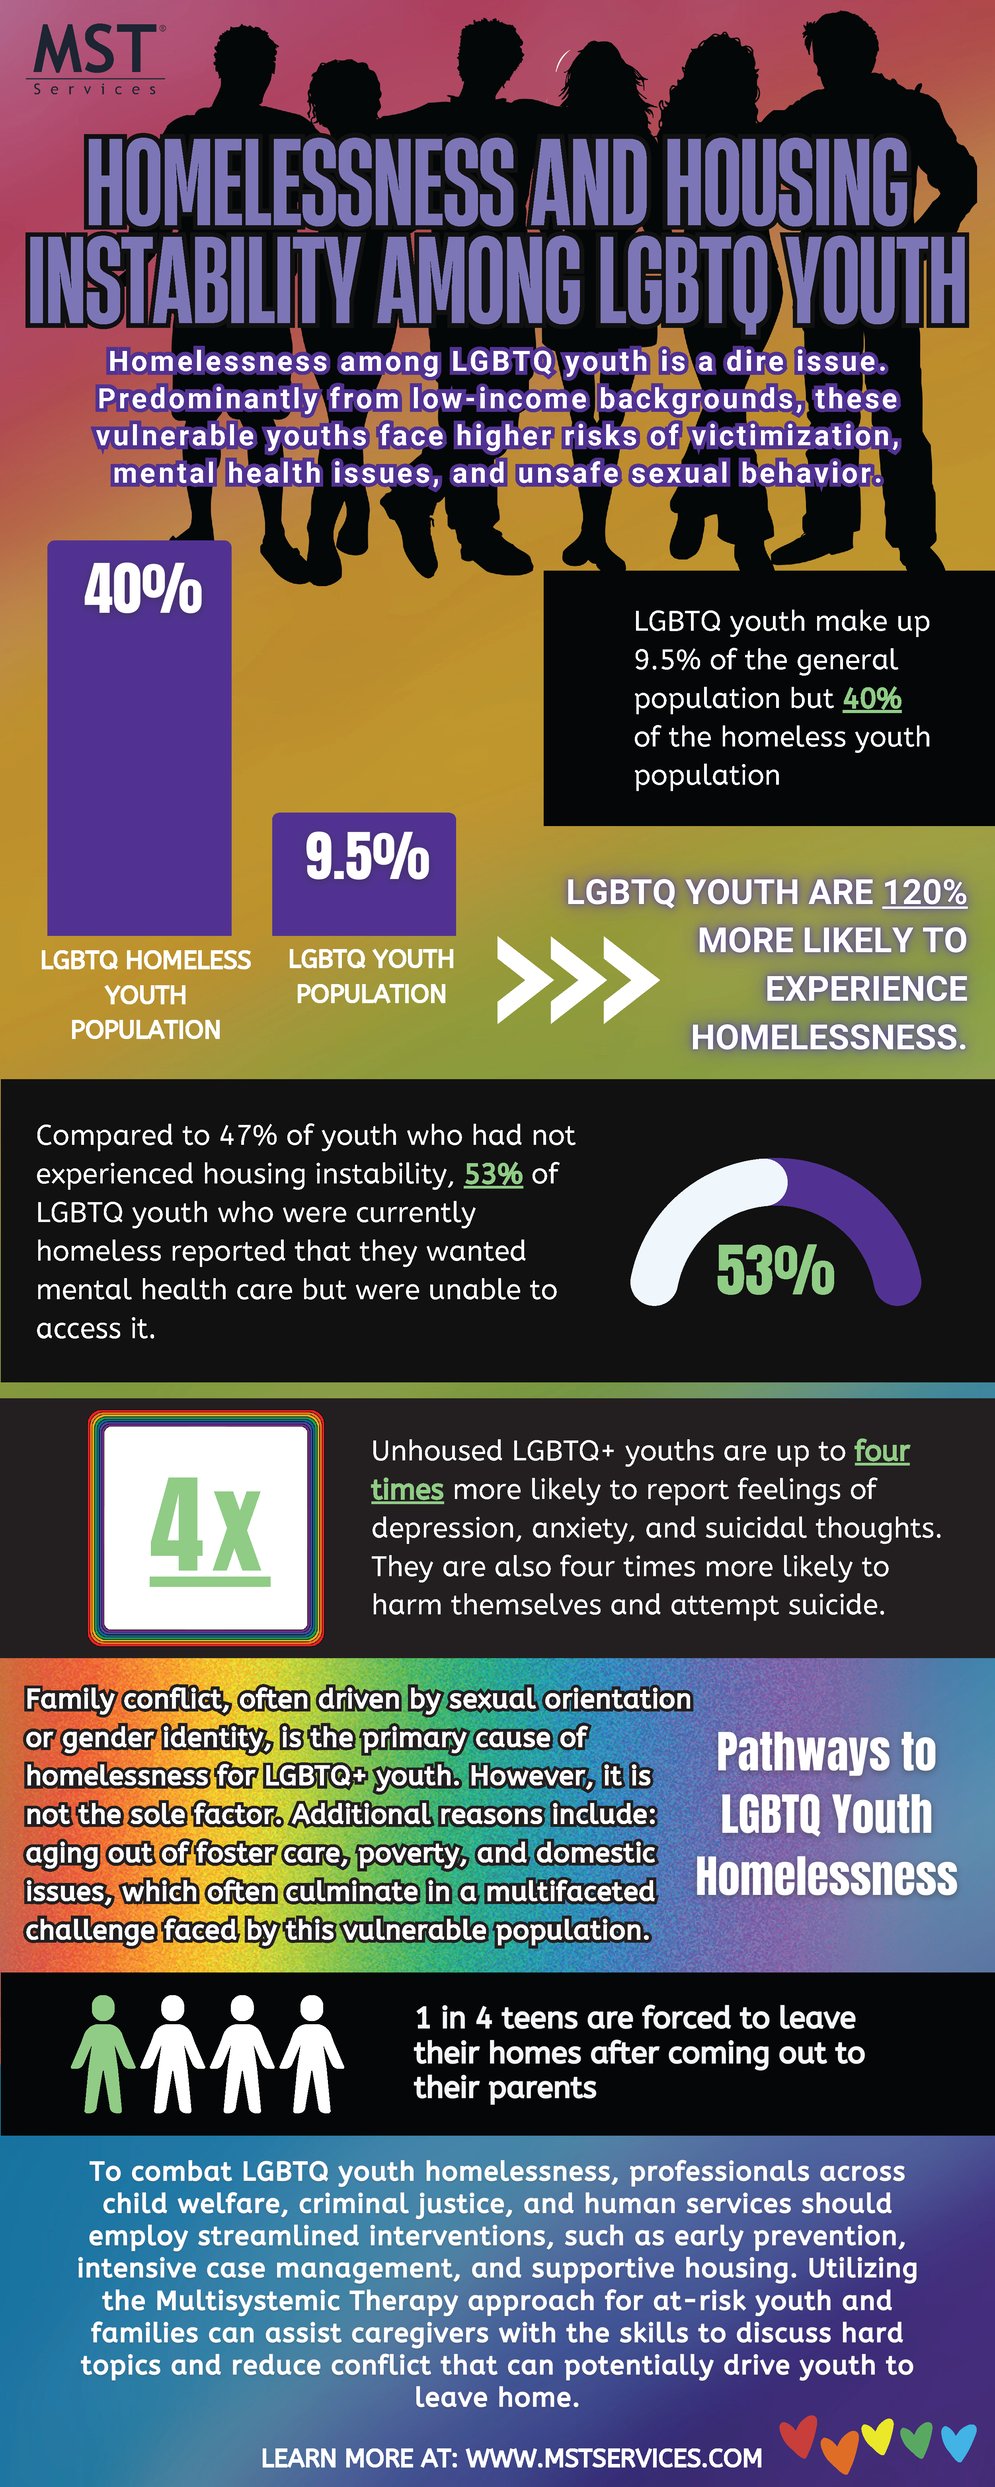 Homelessness and Housing Instability Among LGBTQ Youth (1)